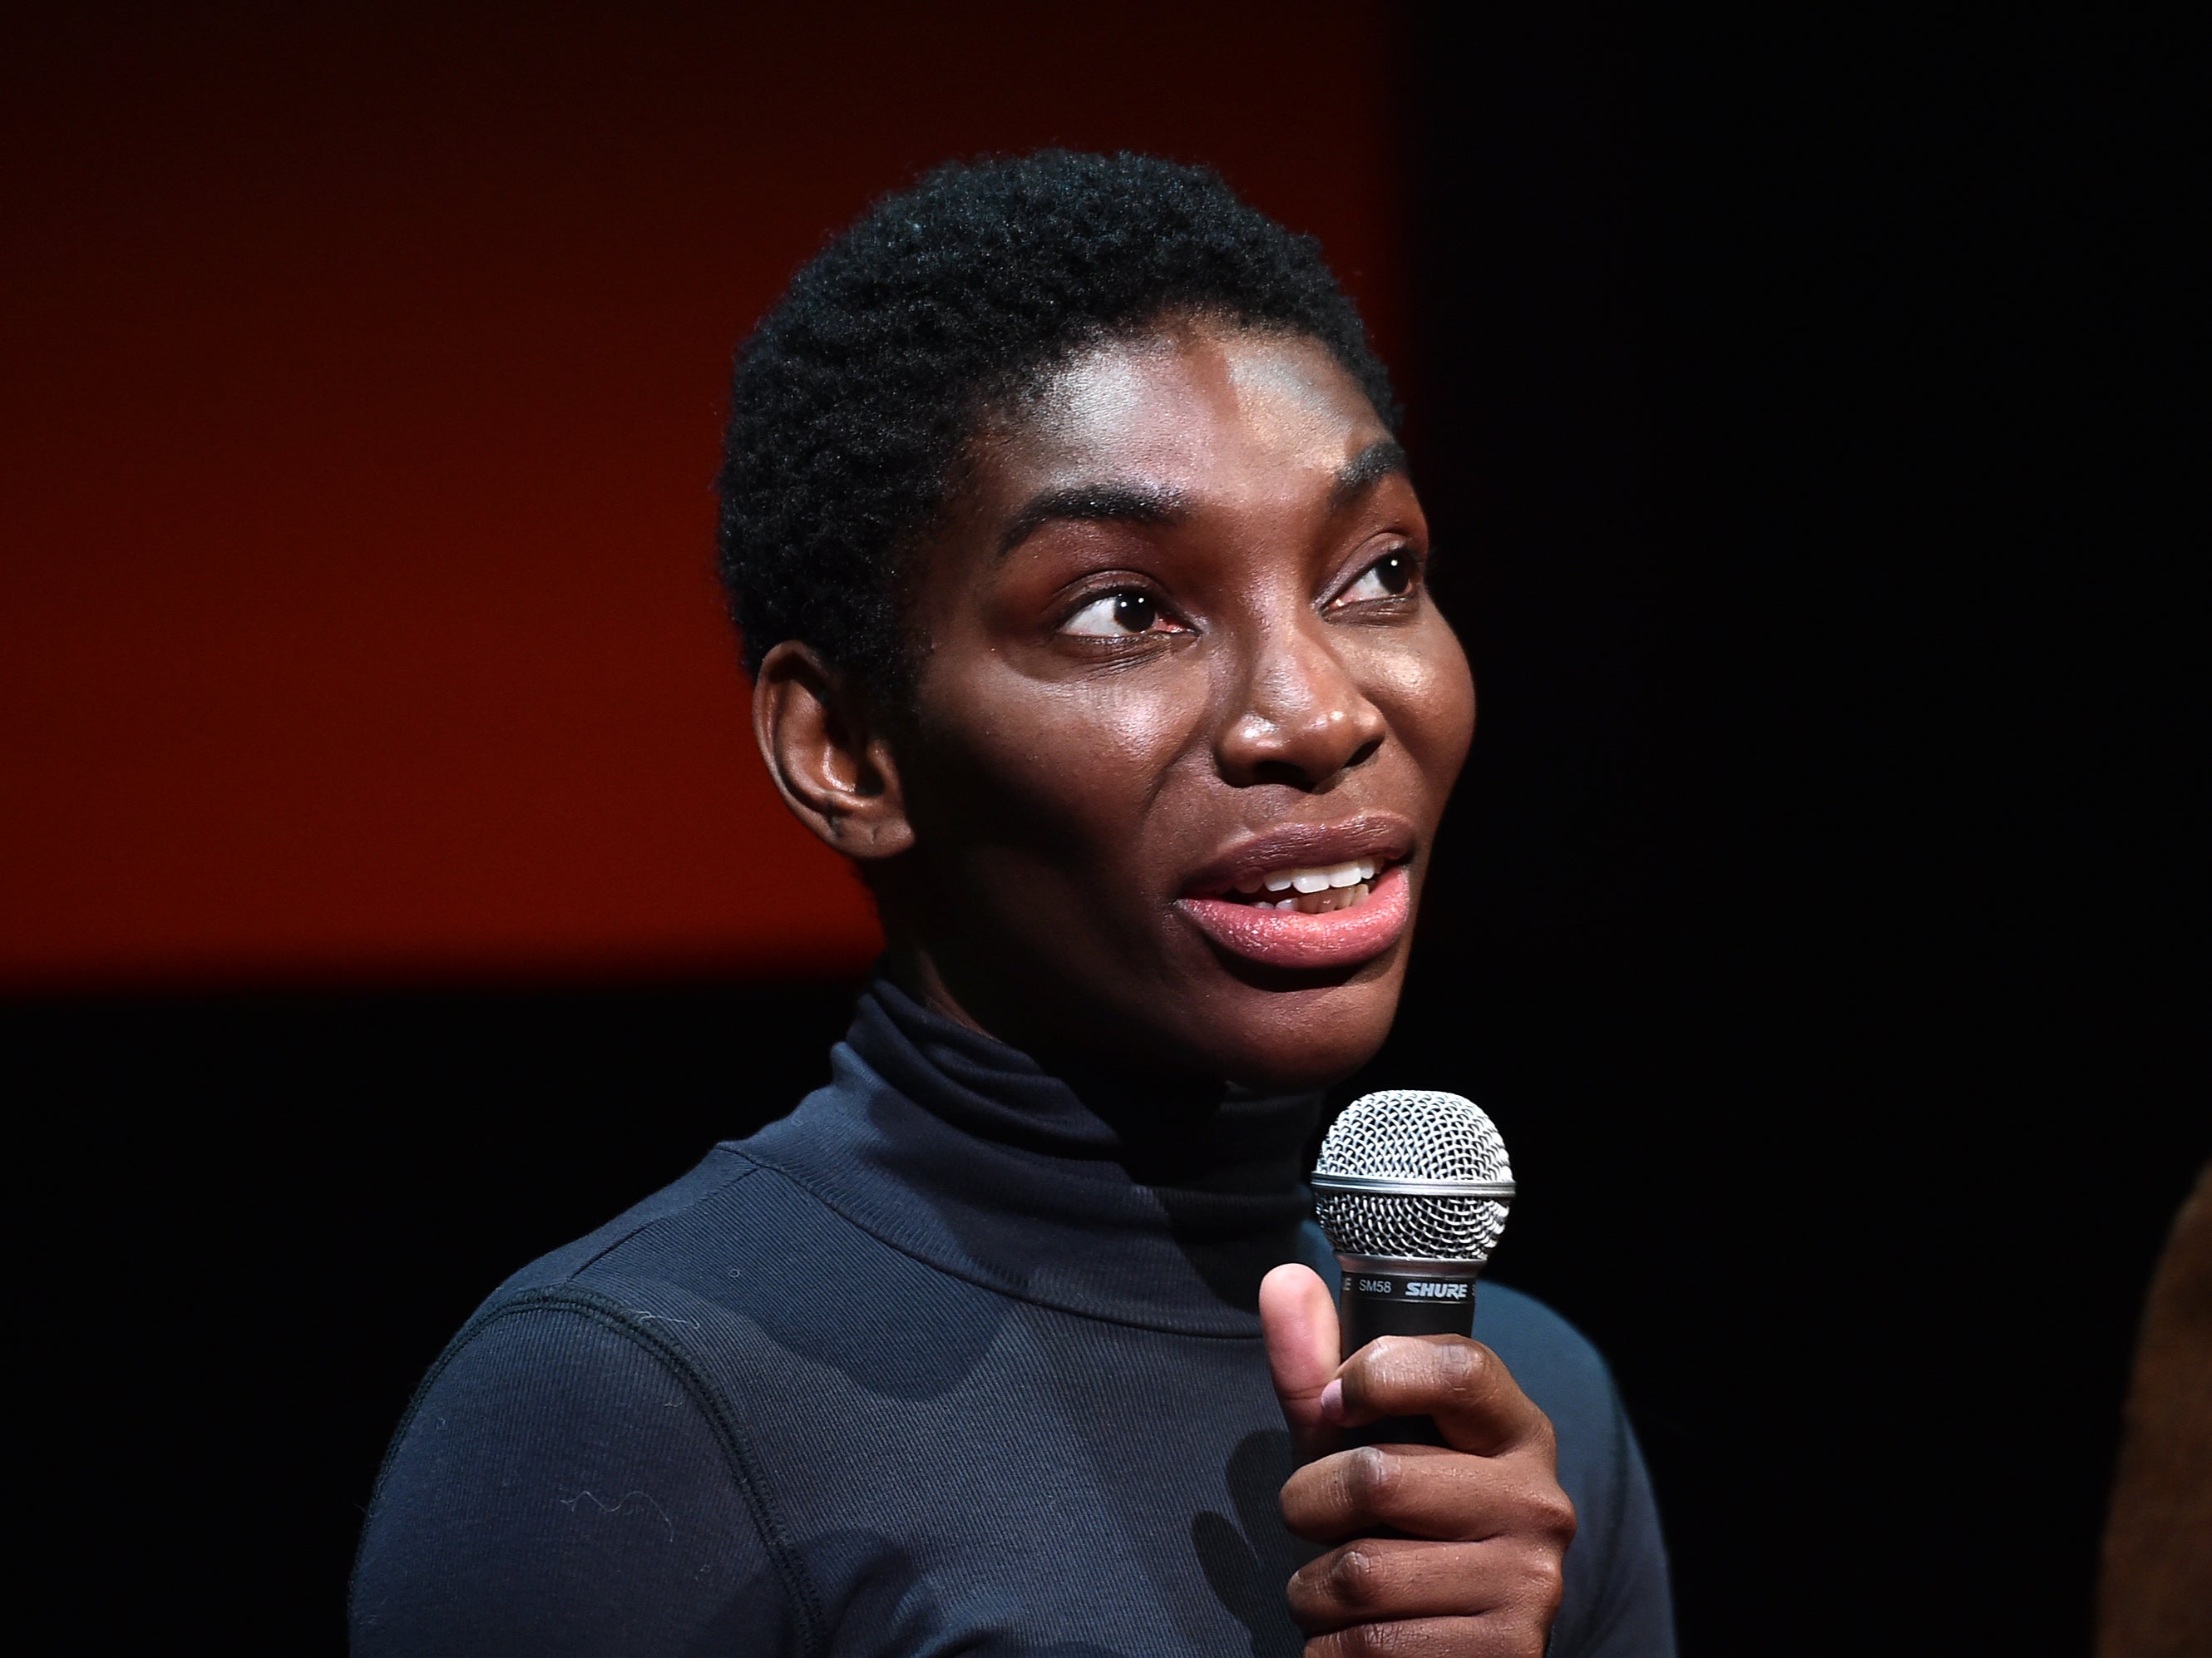 Michaela Coel’s widely lauded series was notably missing from the nominations